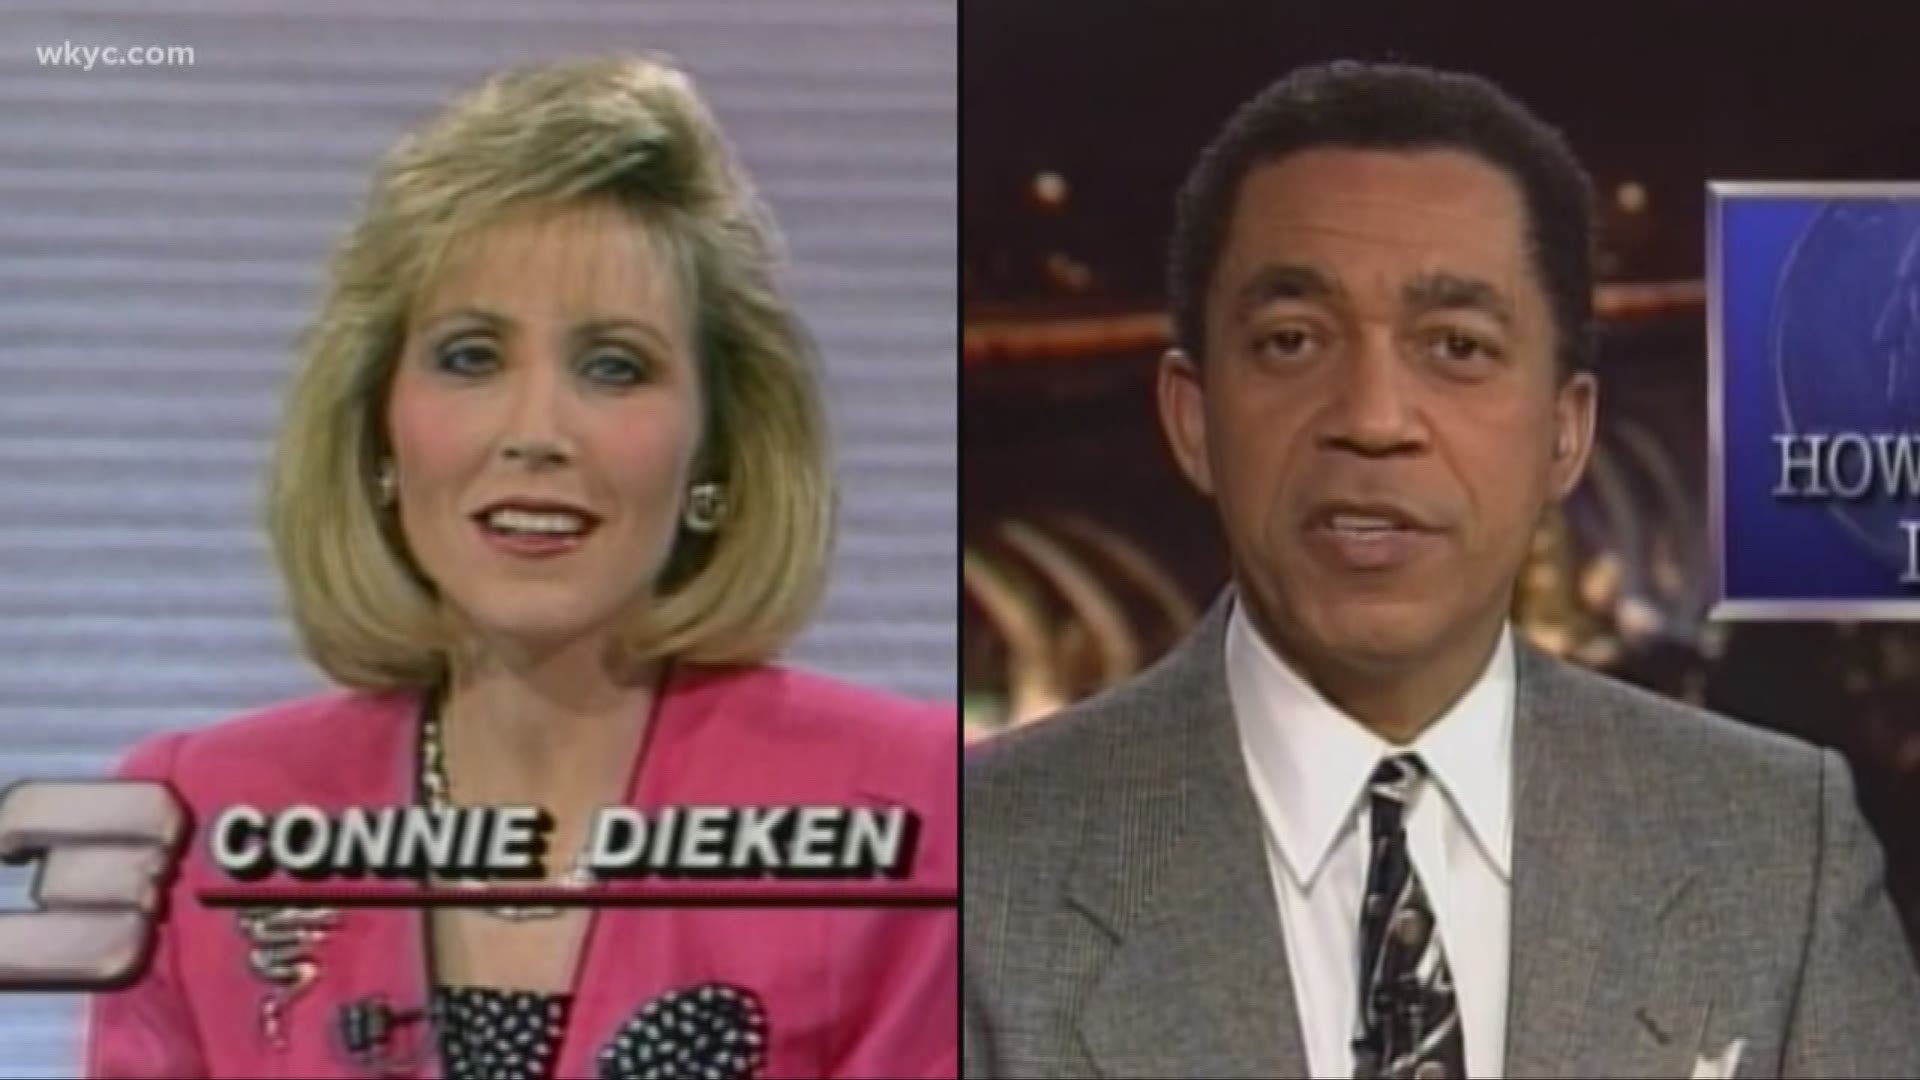 Nov. 1, 2018: To celebrate our 70th anniversary, some familiar faces are returning to WKYC. First up: Connie Dieken and Leon Bibb.